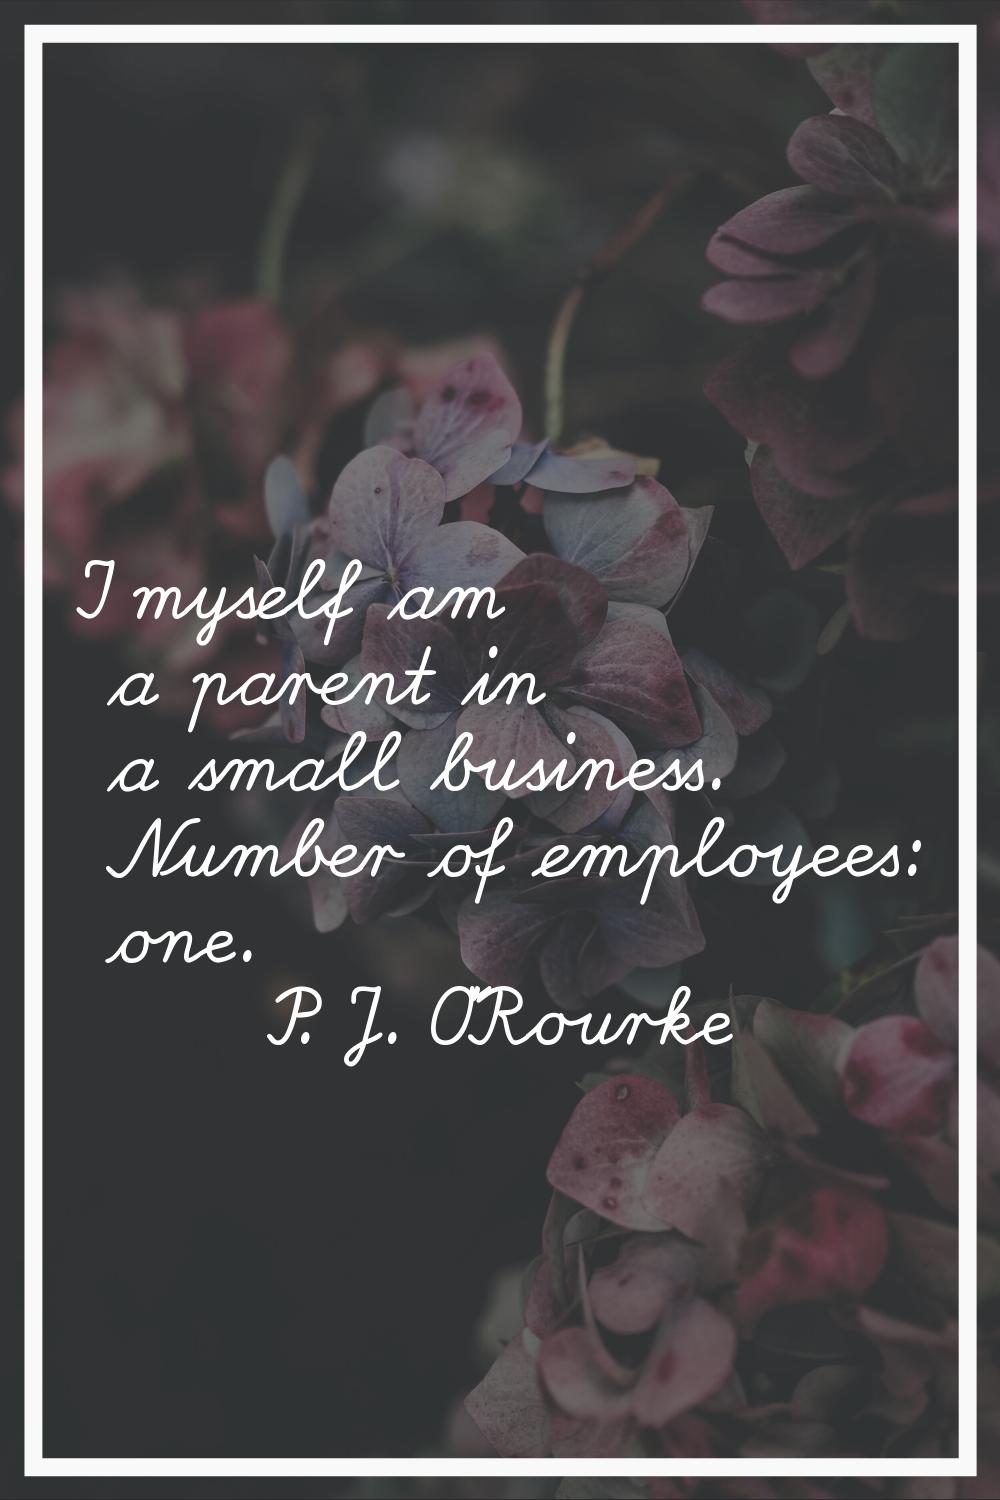 I myself am a parent in a small business. Number of employees: one.